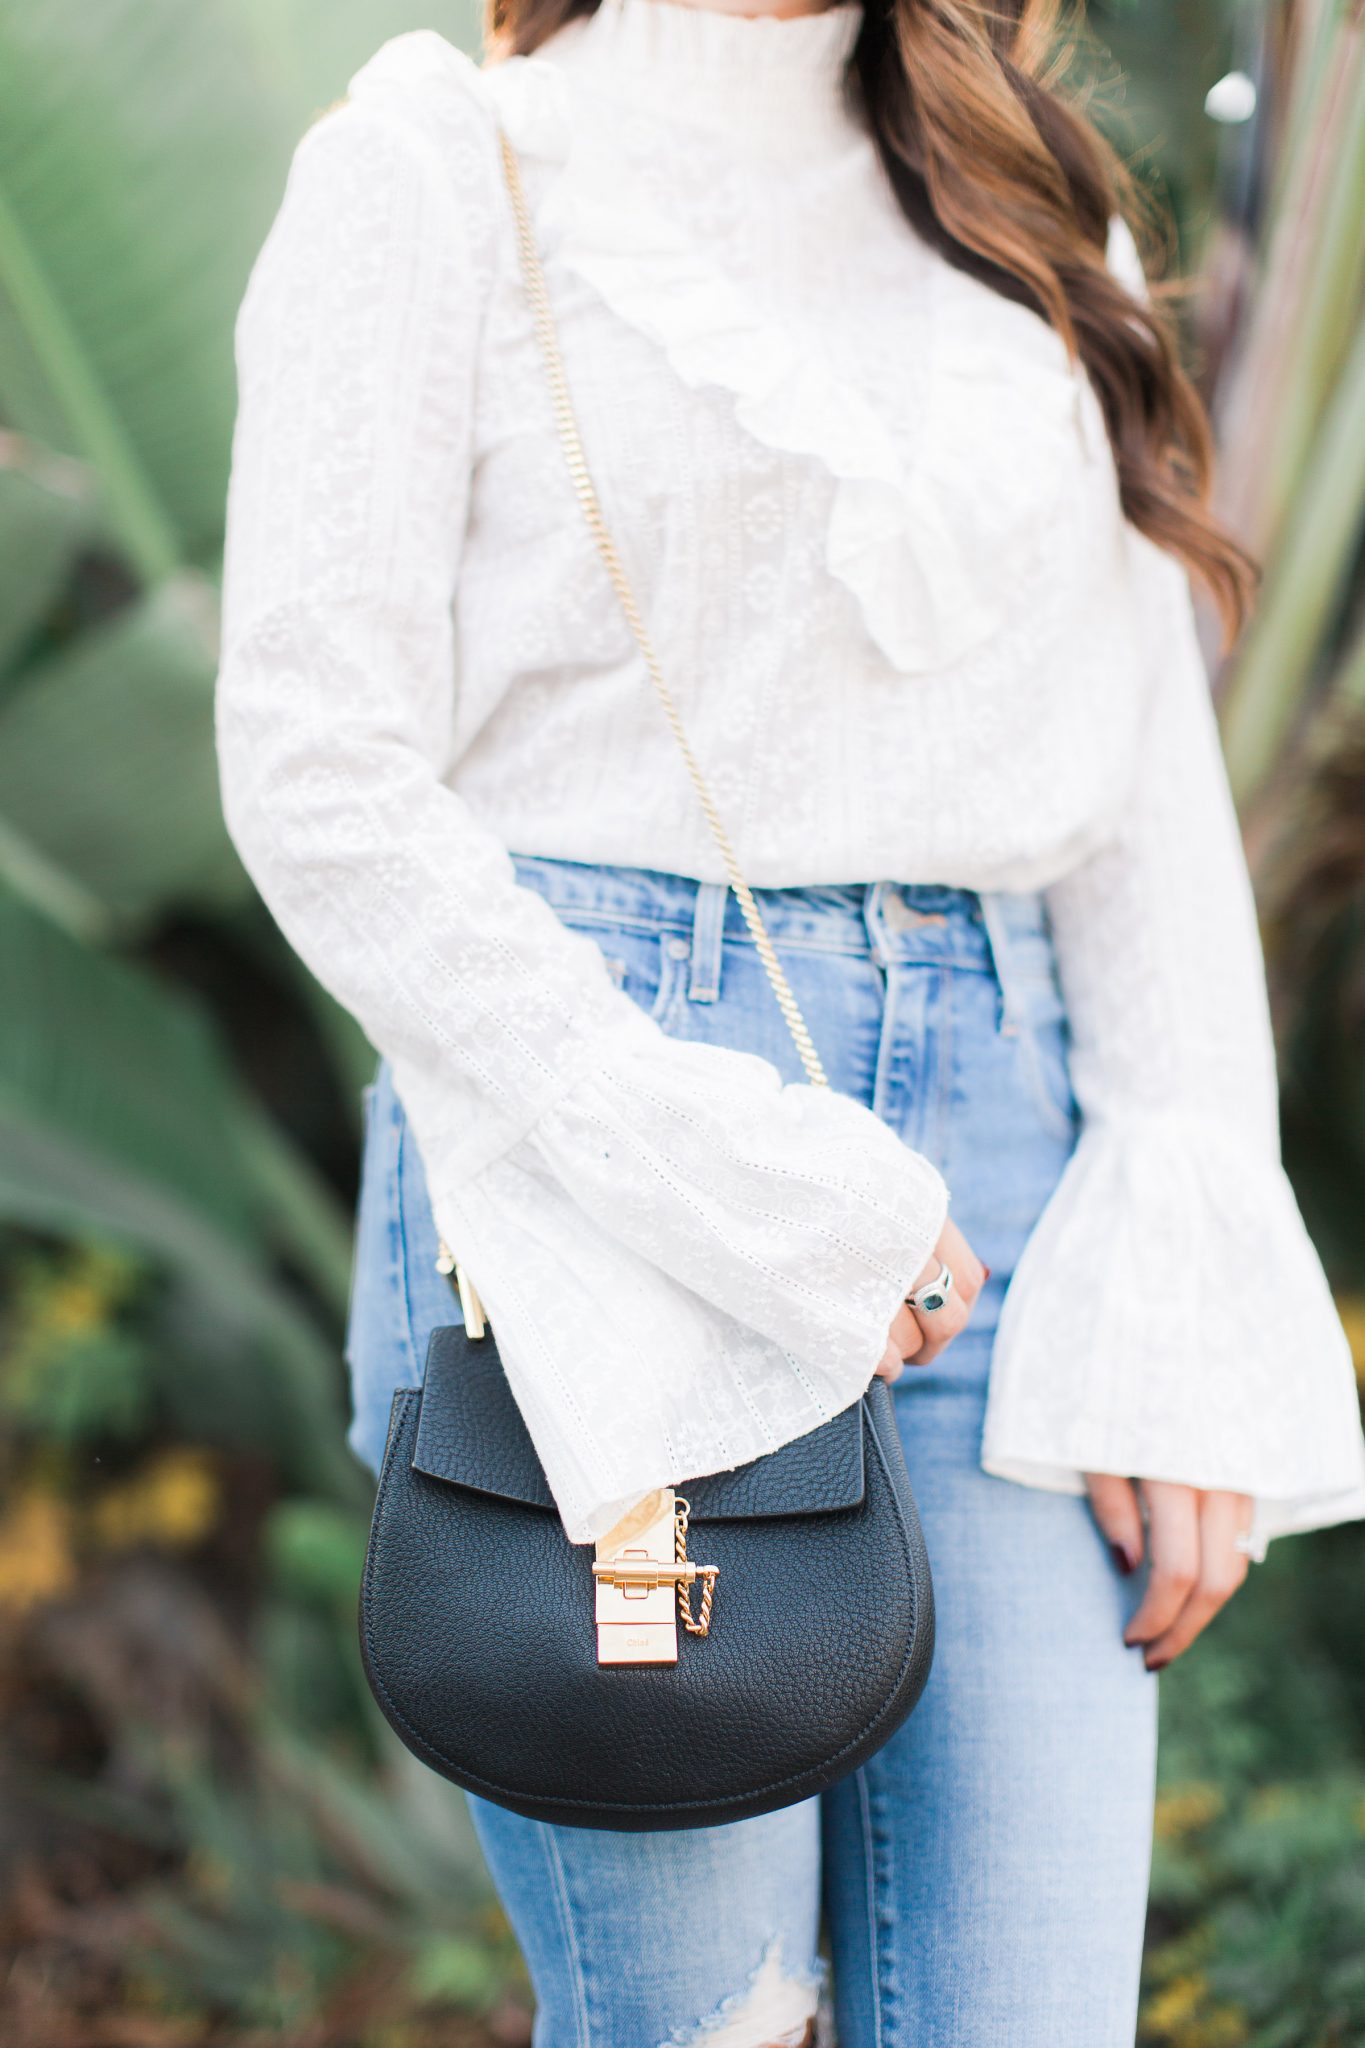 Maxie Elise | White lace top & distressed denim - New Year Resolutions by popular Orange County blogger Maxie Elise